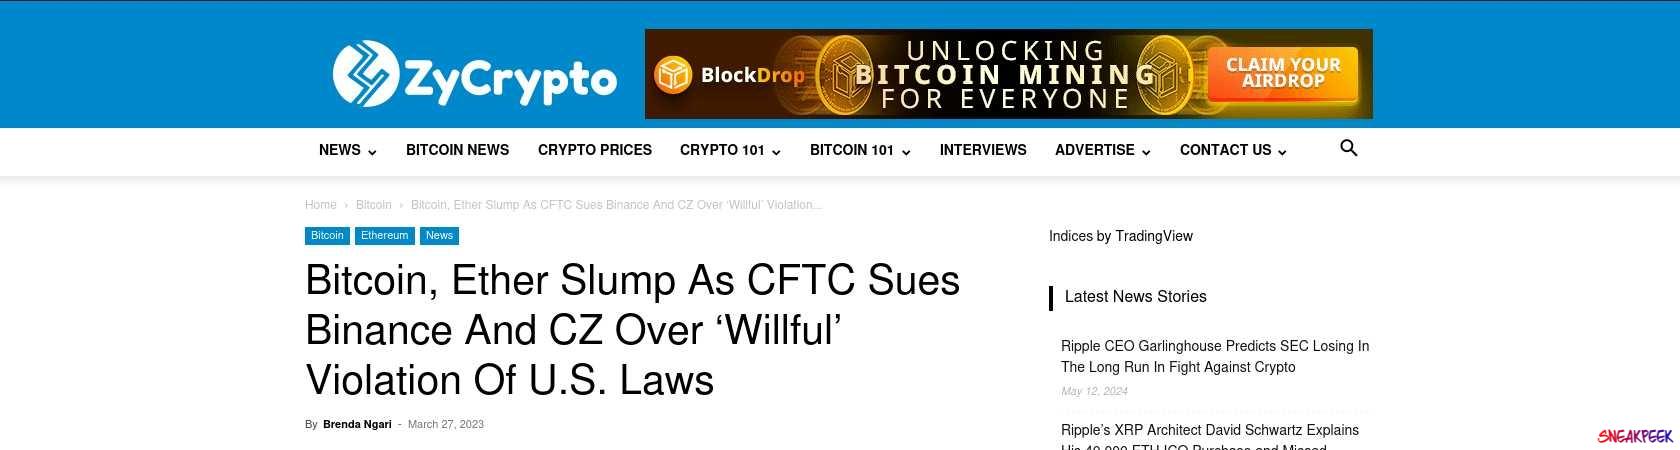 Read the full Article:  ⭲ Bitcoin, Ether Slump As CFTC Sues Binance And CZ Over ‘Willful’ Violation Of U.S. Laws